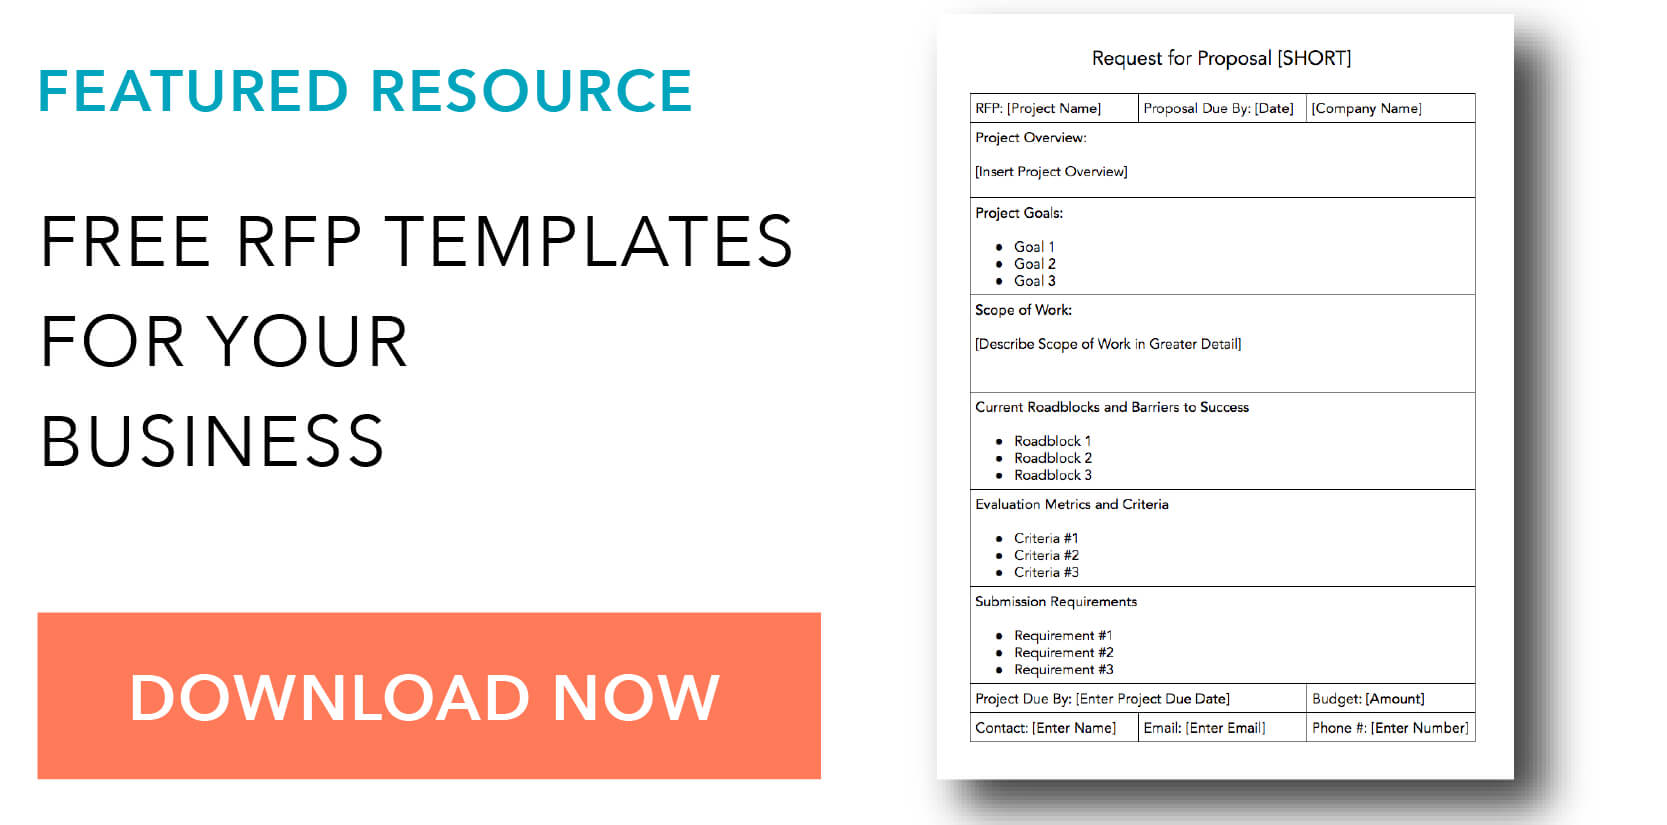 How To Write A Request For Proposal, With Template And Sample With Regard To Post Event Evaluation Report Template